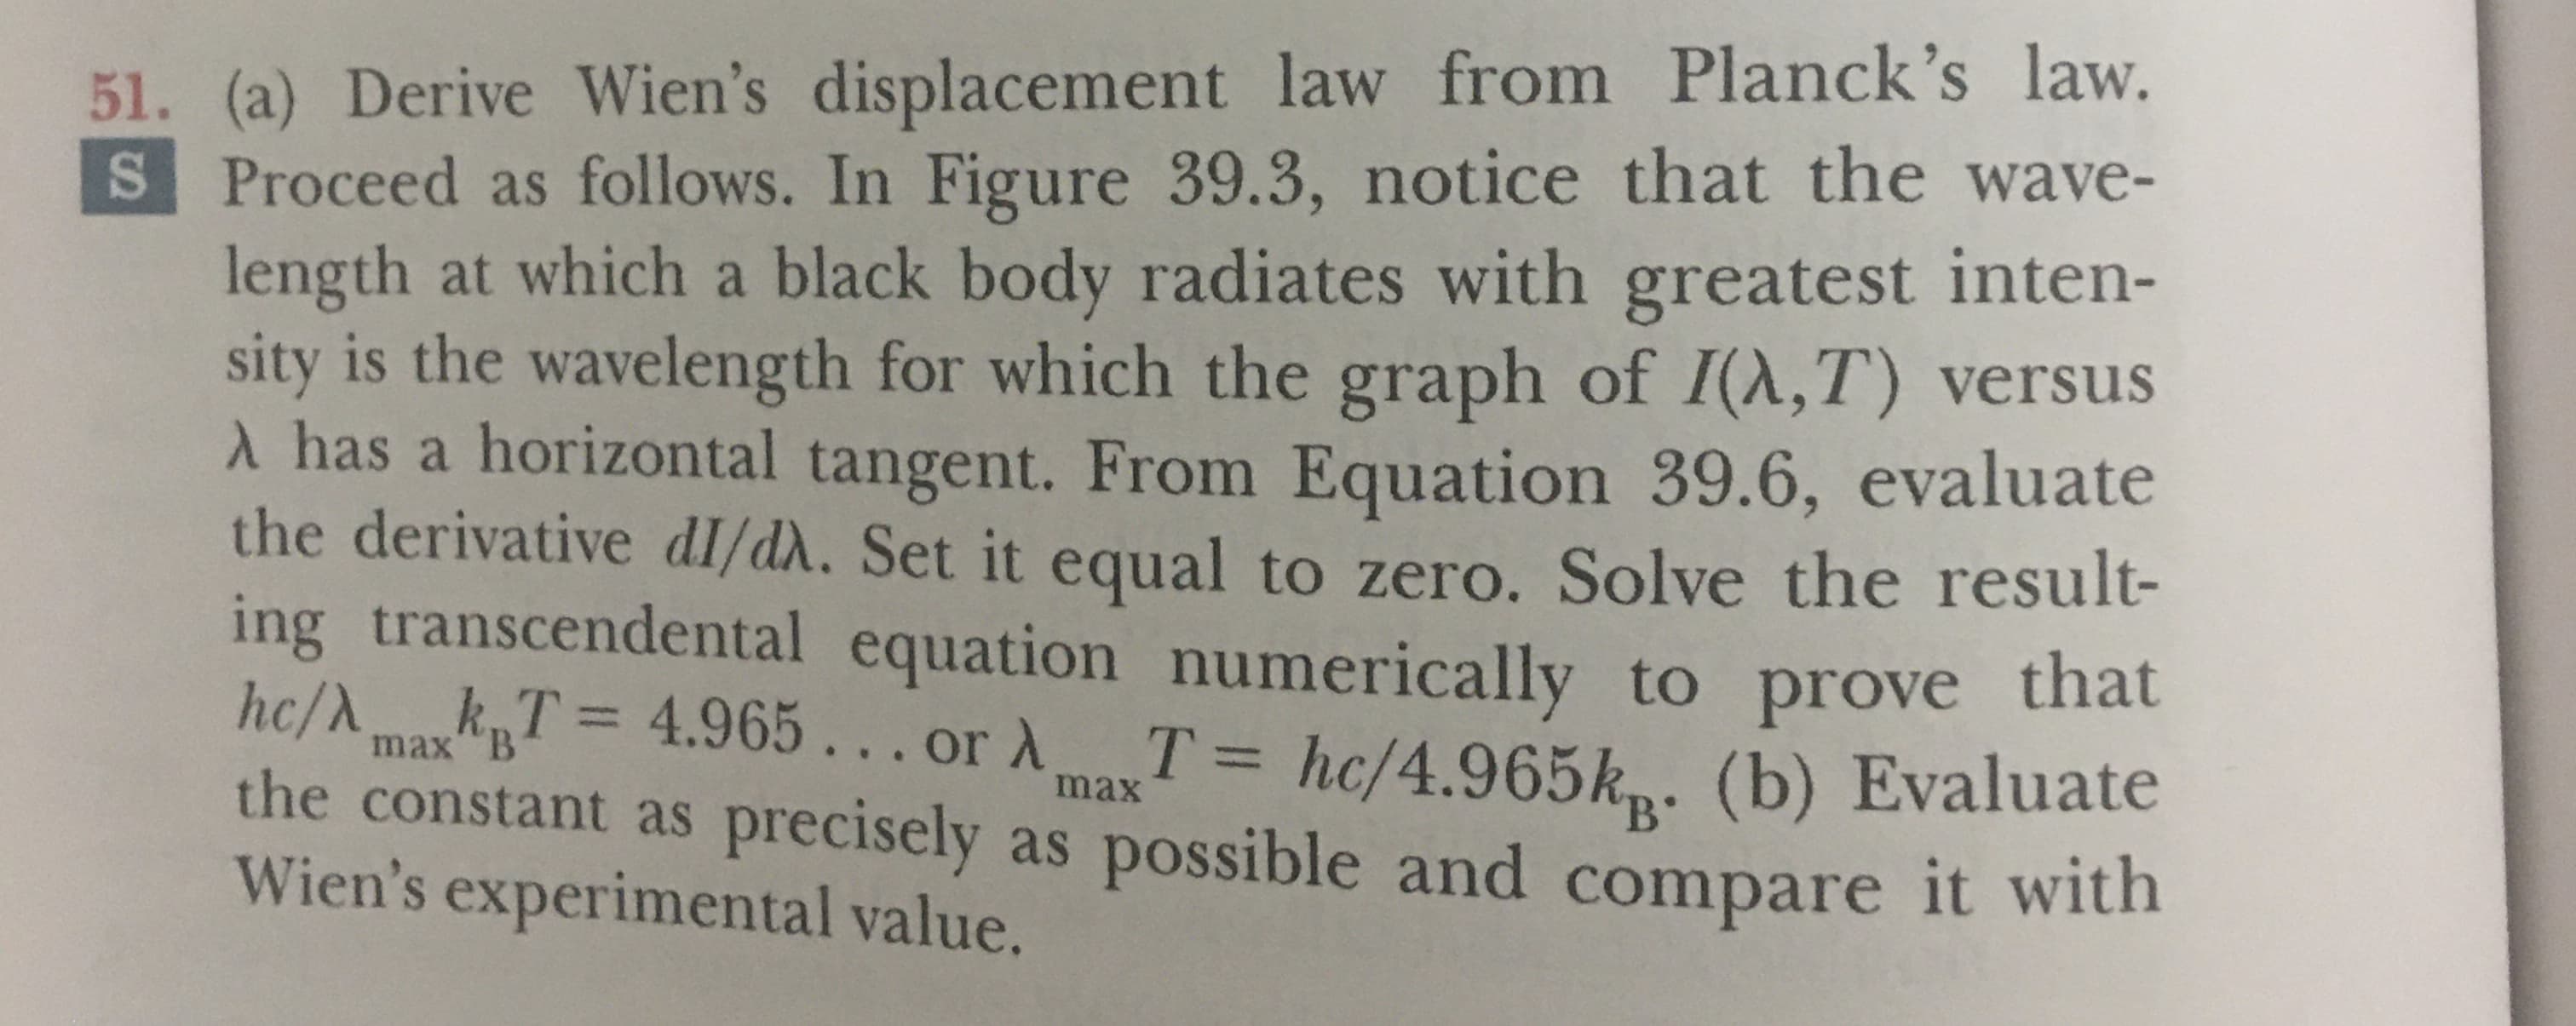 51. (a) Derive Wien's displacement law from Planck's law.
S Proceed as follows. In Figure 39.3, notice that the wave-
length at which a black body radiates with greatest inten-
sity is the wavelength for which the graph of I(A,T) versus
has a horizontal tangent. From Equation 39.6, evaluate
the derivative dI/d. Set it equal to zero. Solve the result-
ing transcendental equation numerically to prove that
hc/AkT 4.965... or A
the constant as precisely as possible and compare it with
Wien's experimental value.
T hc/4.965k (b) Evaluate
max B
max
